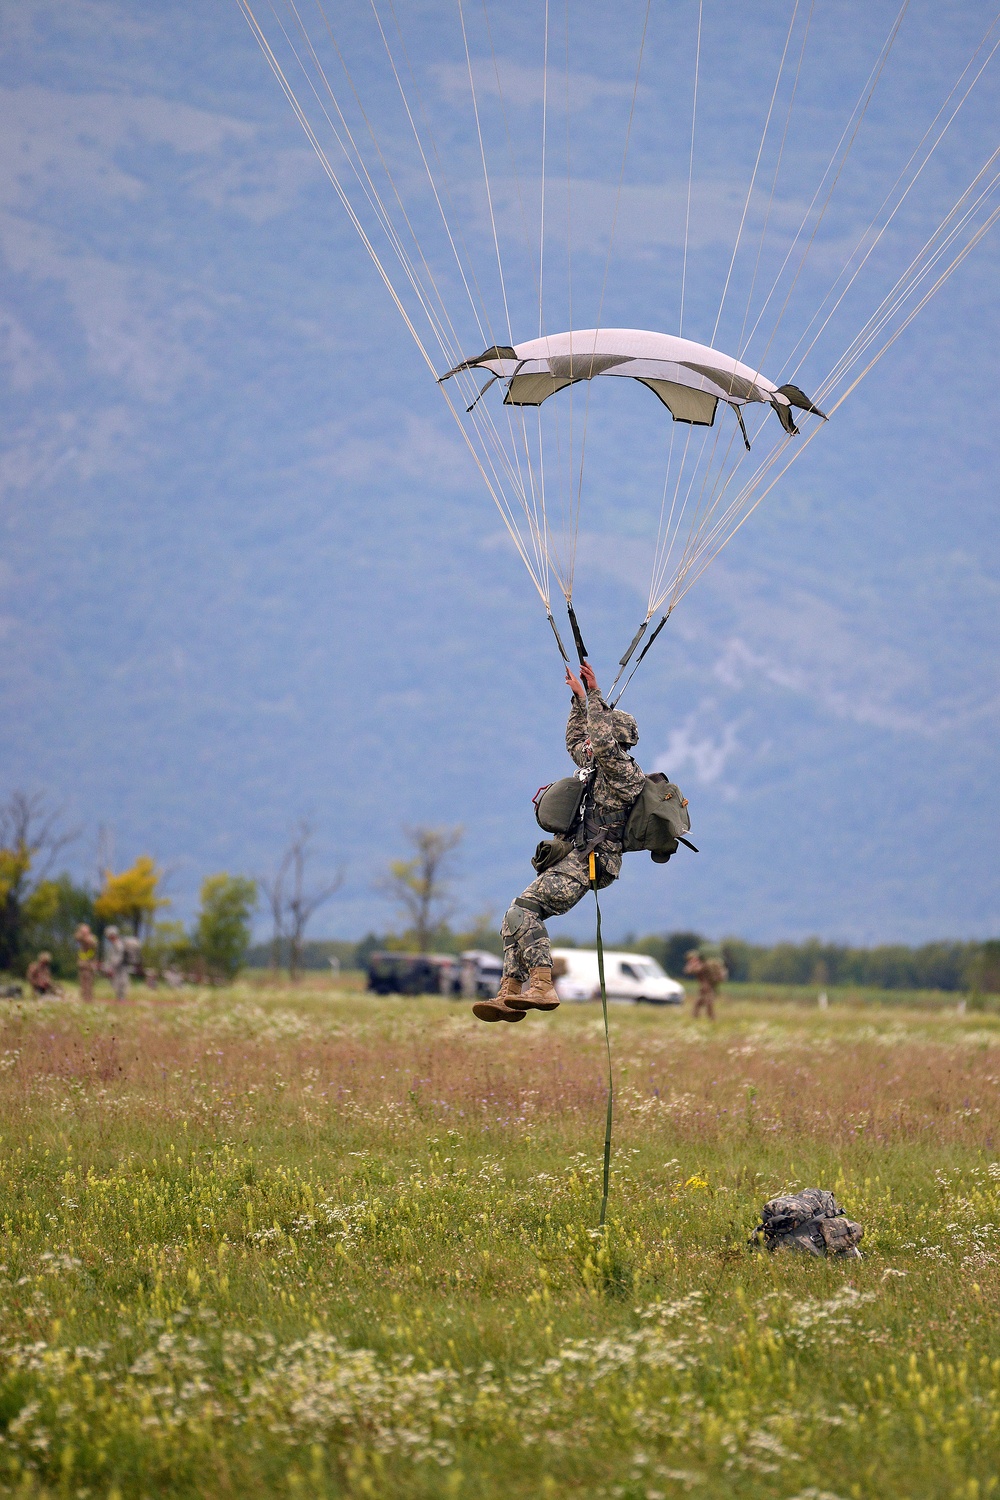 Airborne Operation at Juliet Drop Zone in Pordenone, Italy, Sept. 2015